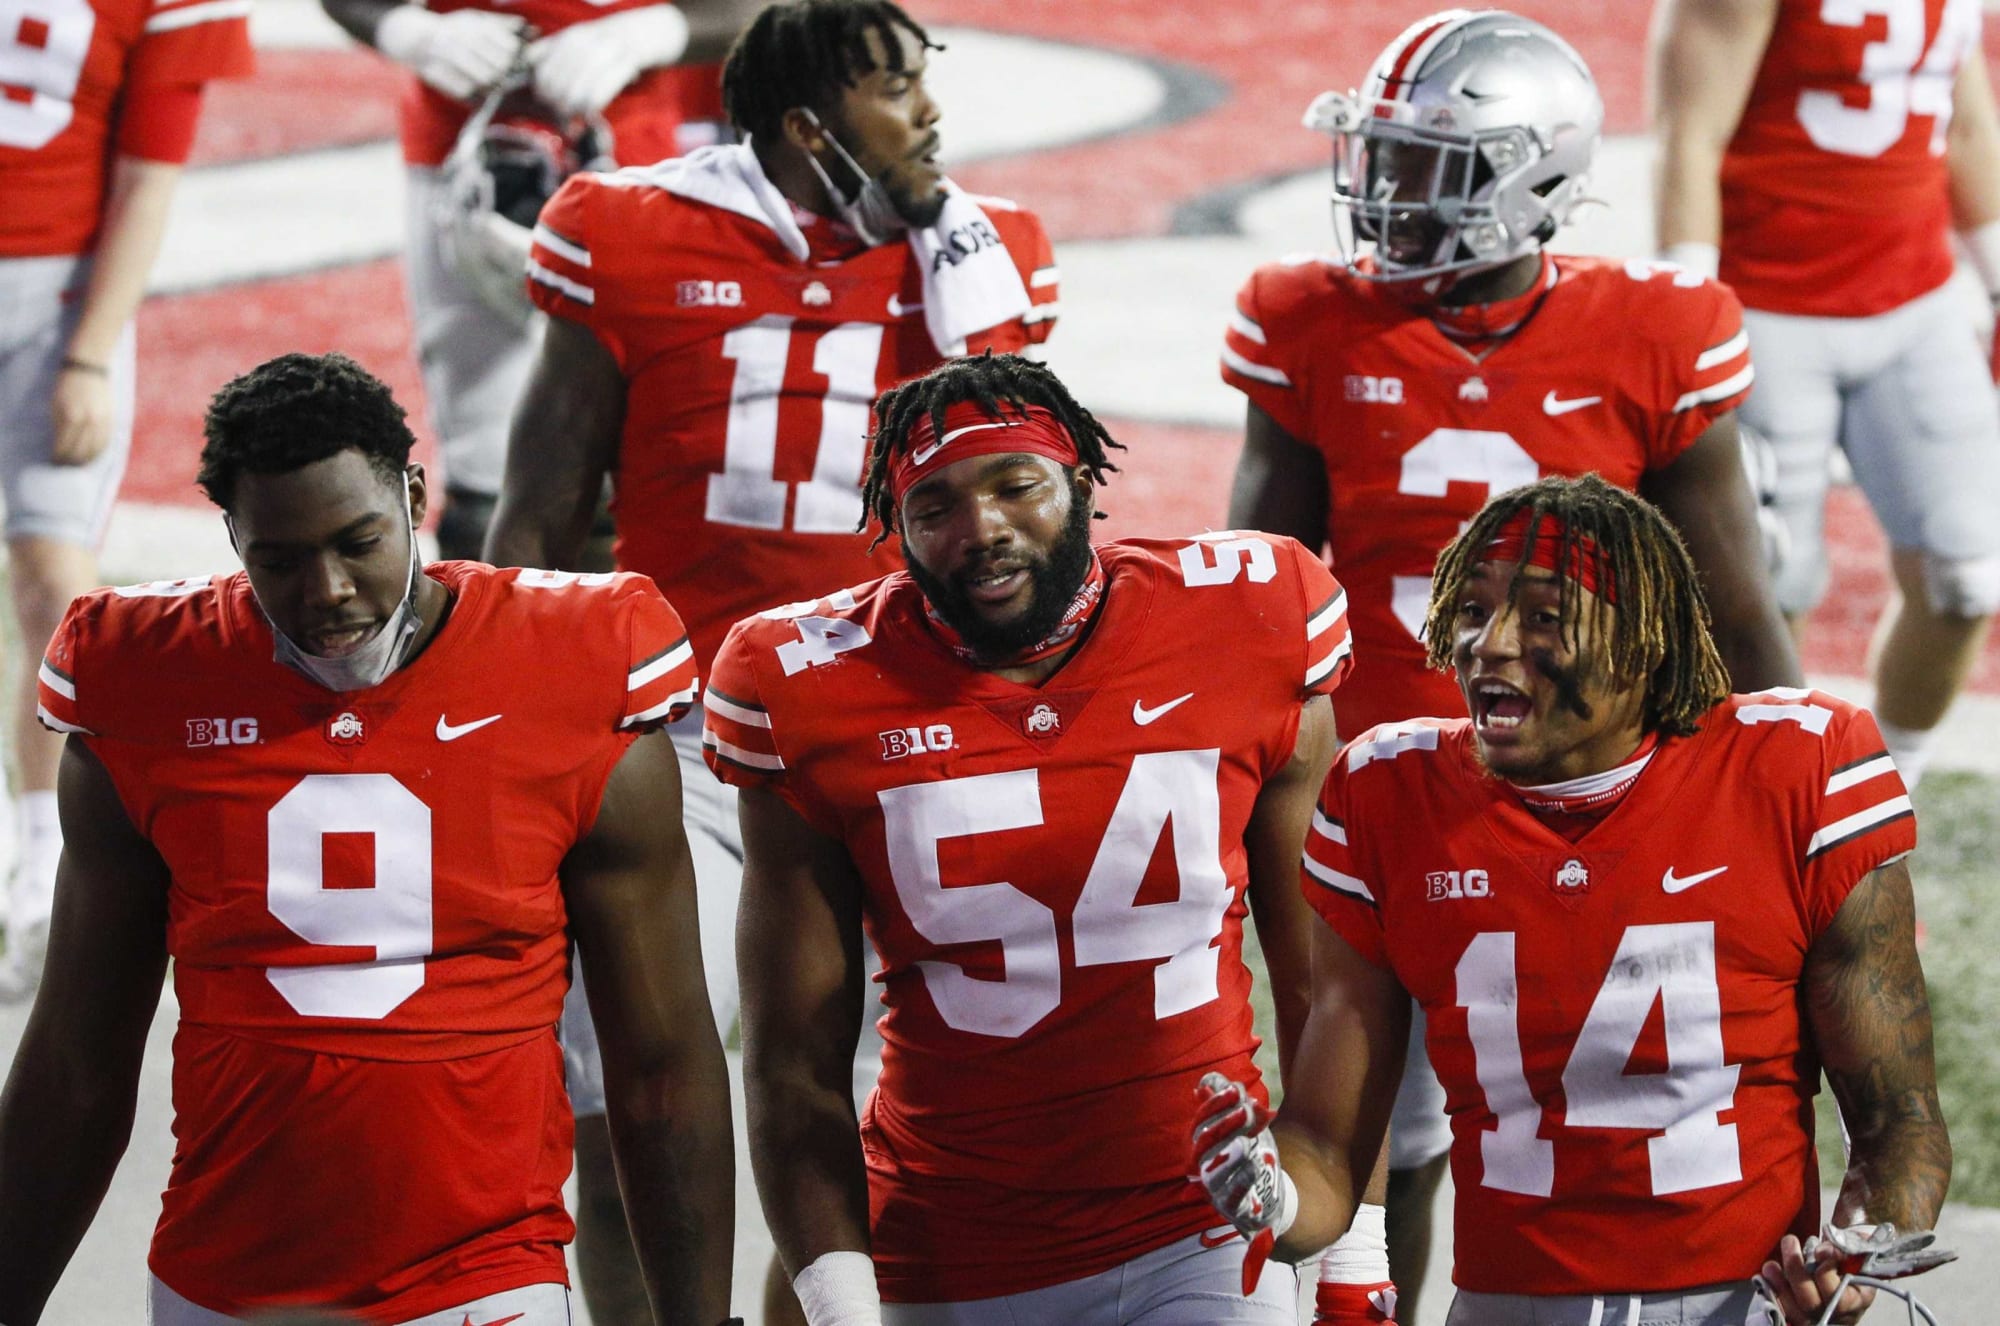 ohio state football roster 2021